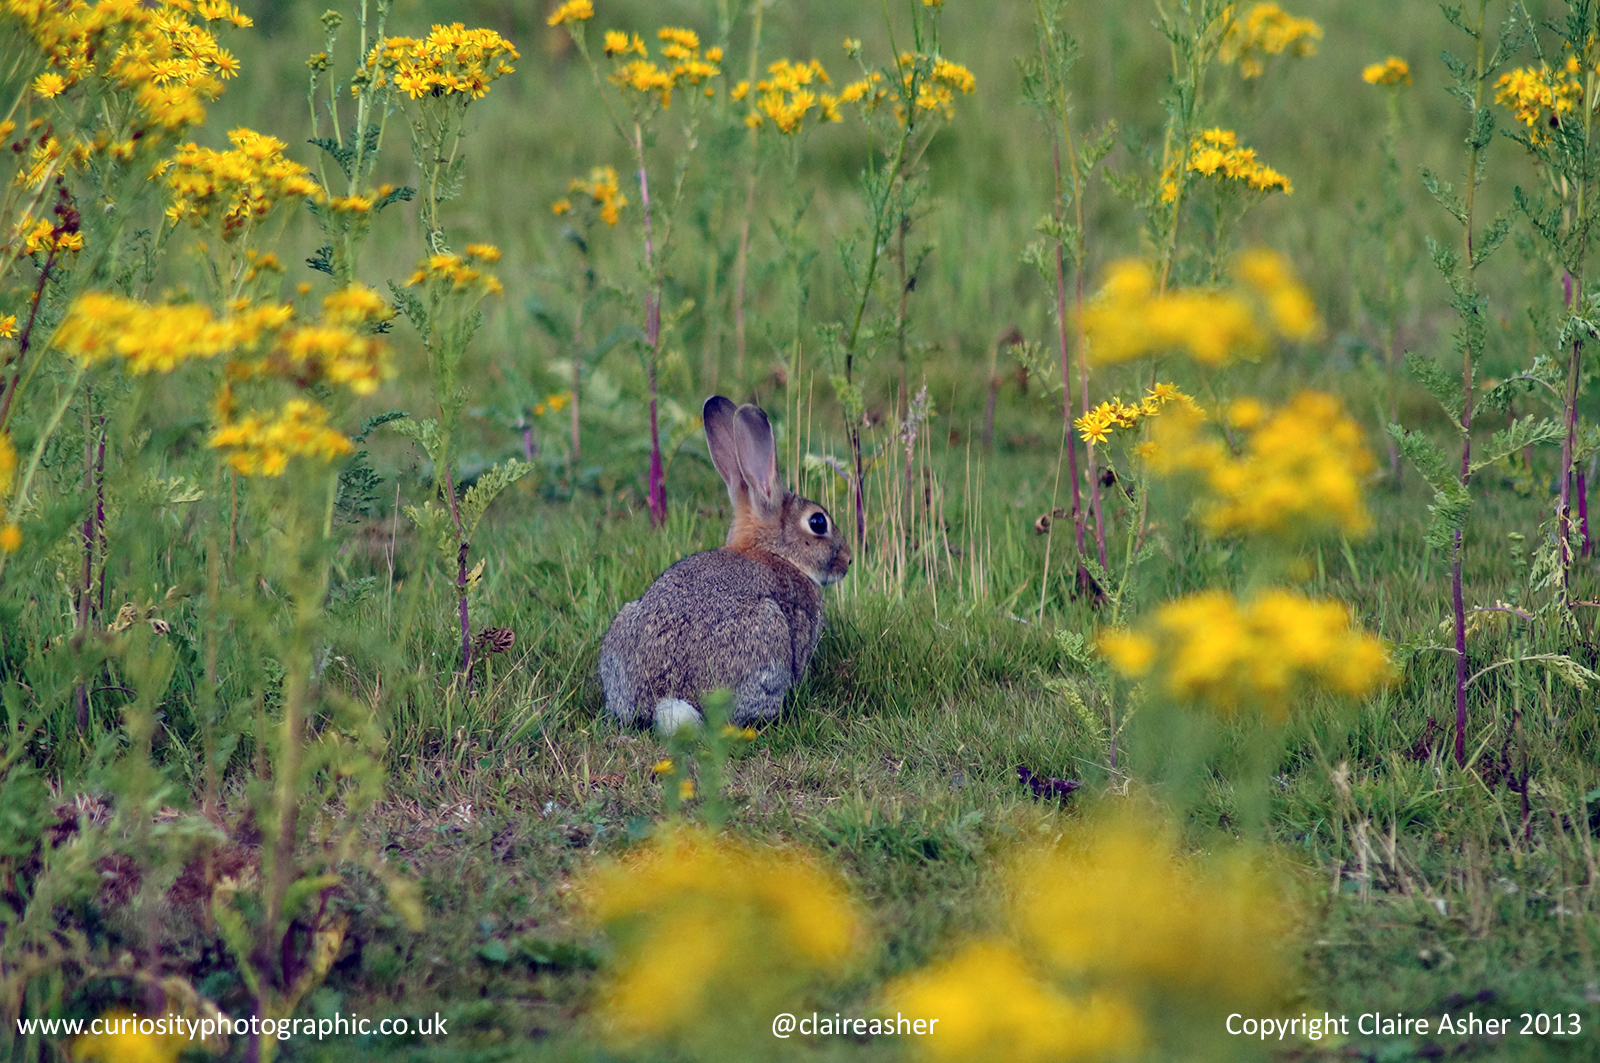 A European Rabbit (Oryctolagus cuniculus) photographed in Hertfordshire, England in 2013